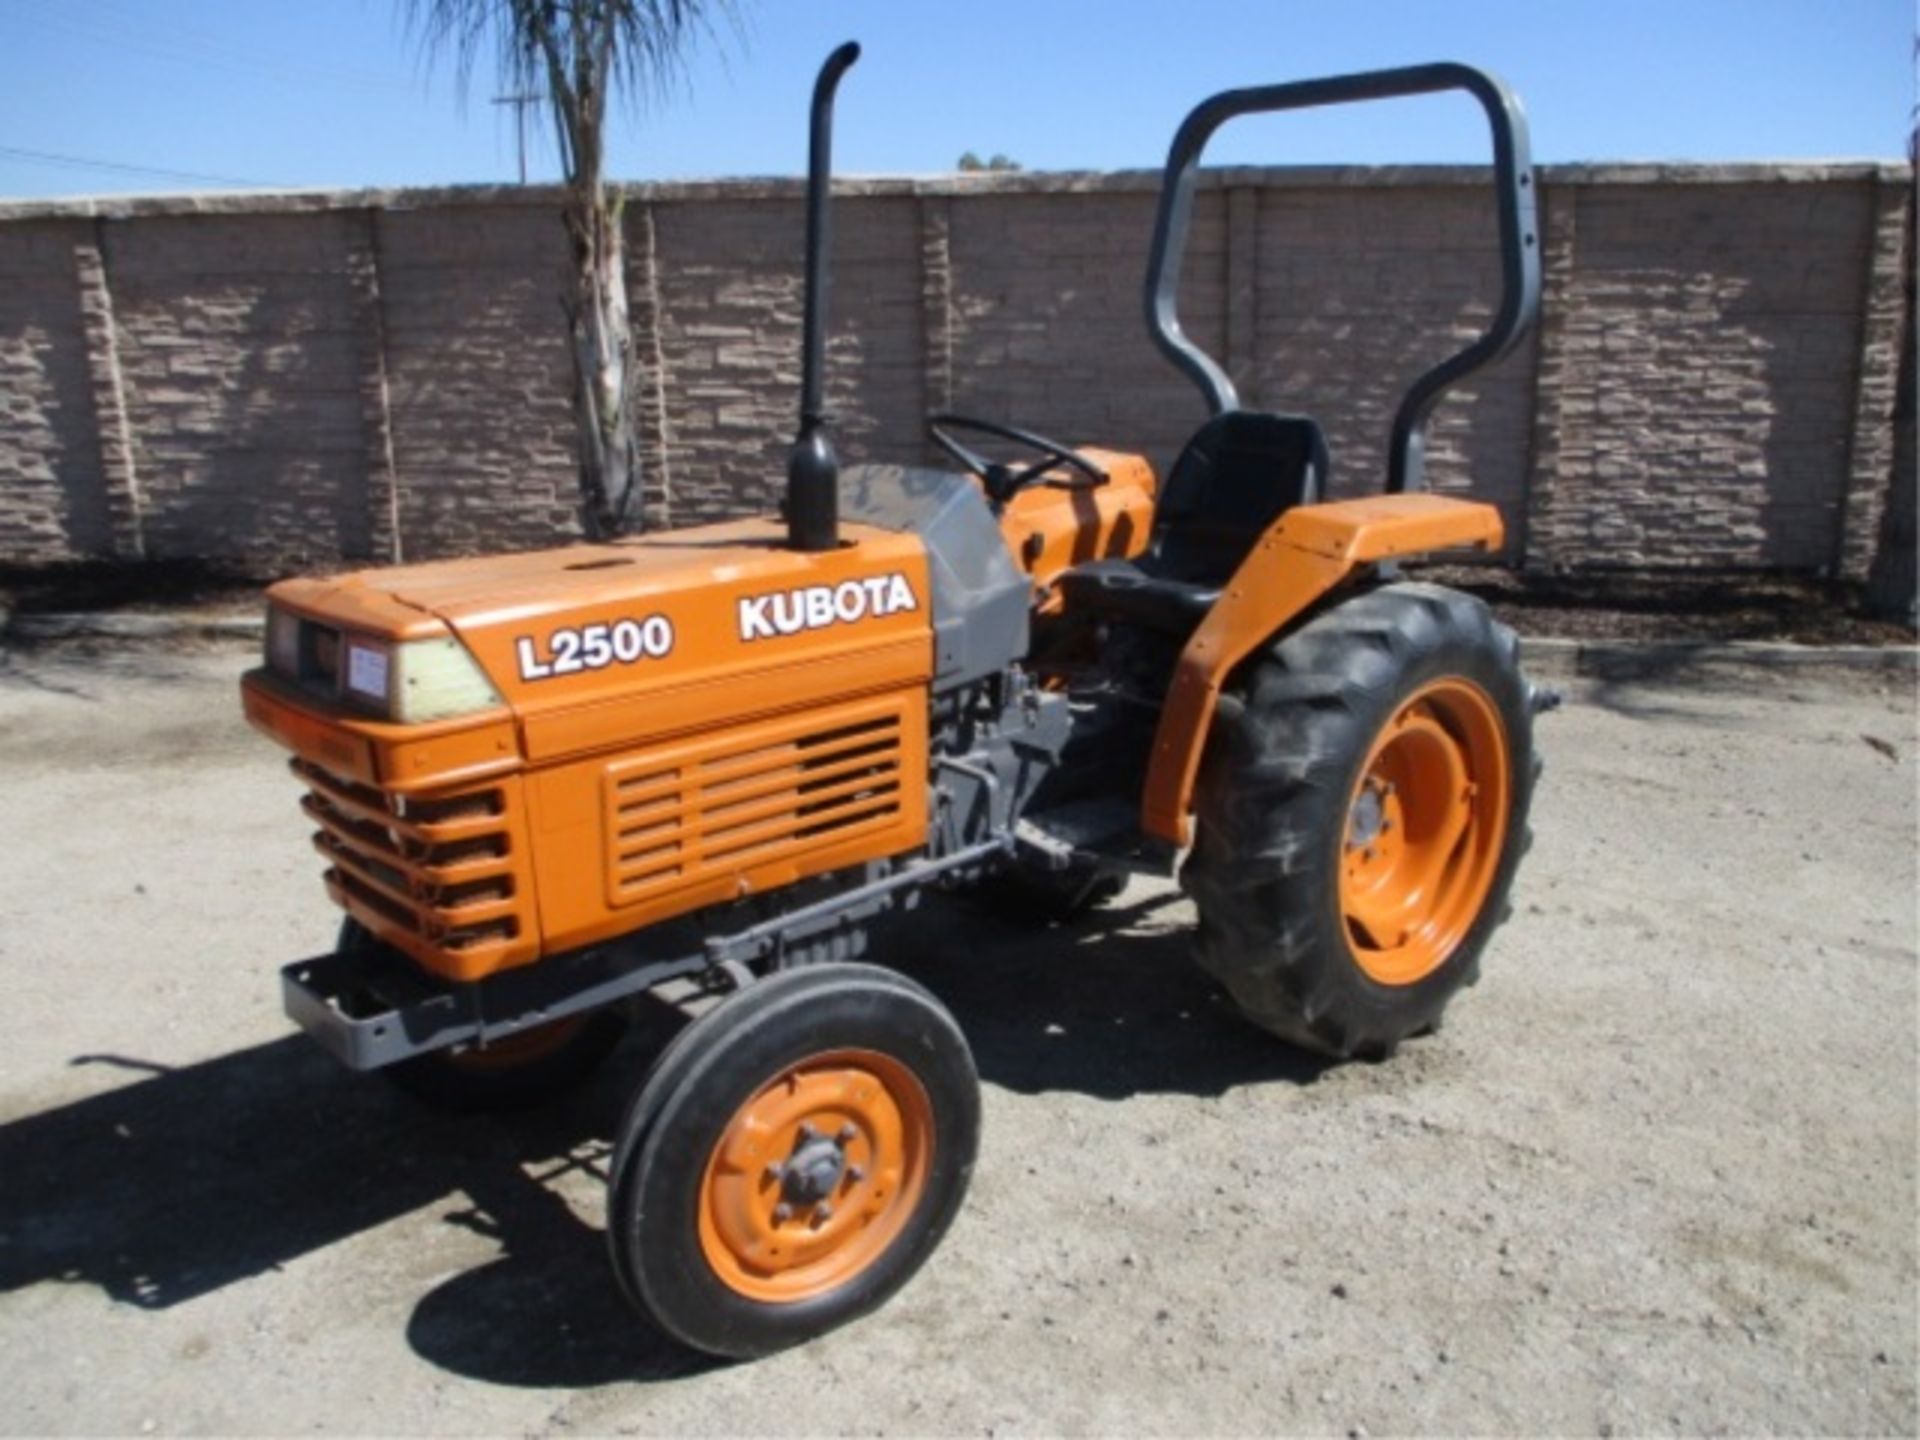 Kubota L2500 Utility Ag Tractor, 3-Cyl Diesel, PTO, 3-Point Hitch, Roll Bar, S/N: 21247, Mile/ - Image 3 of 40